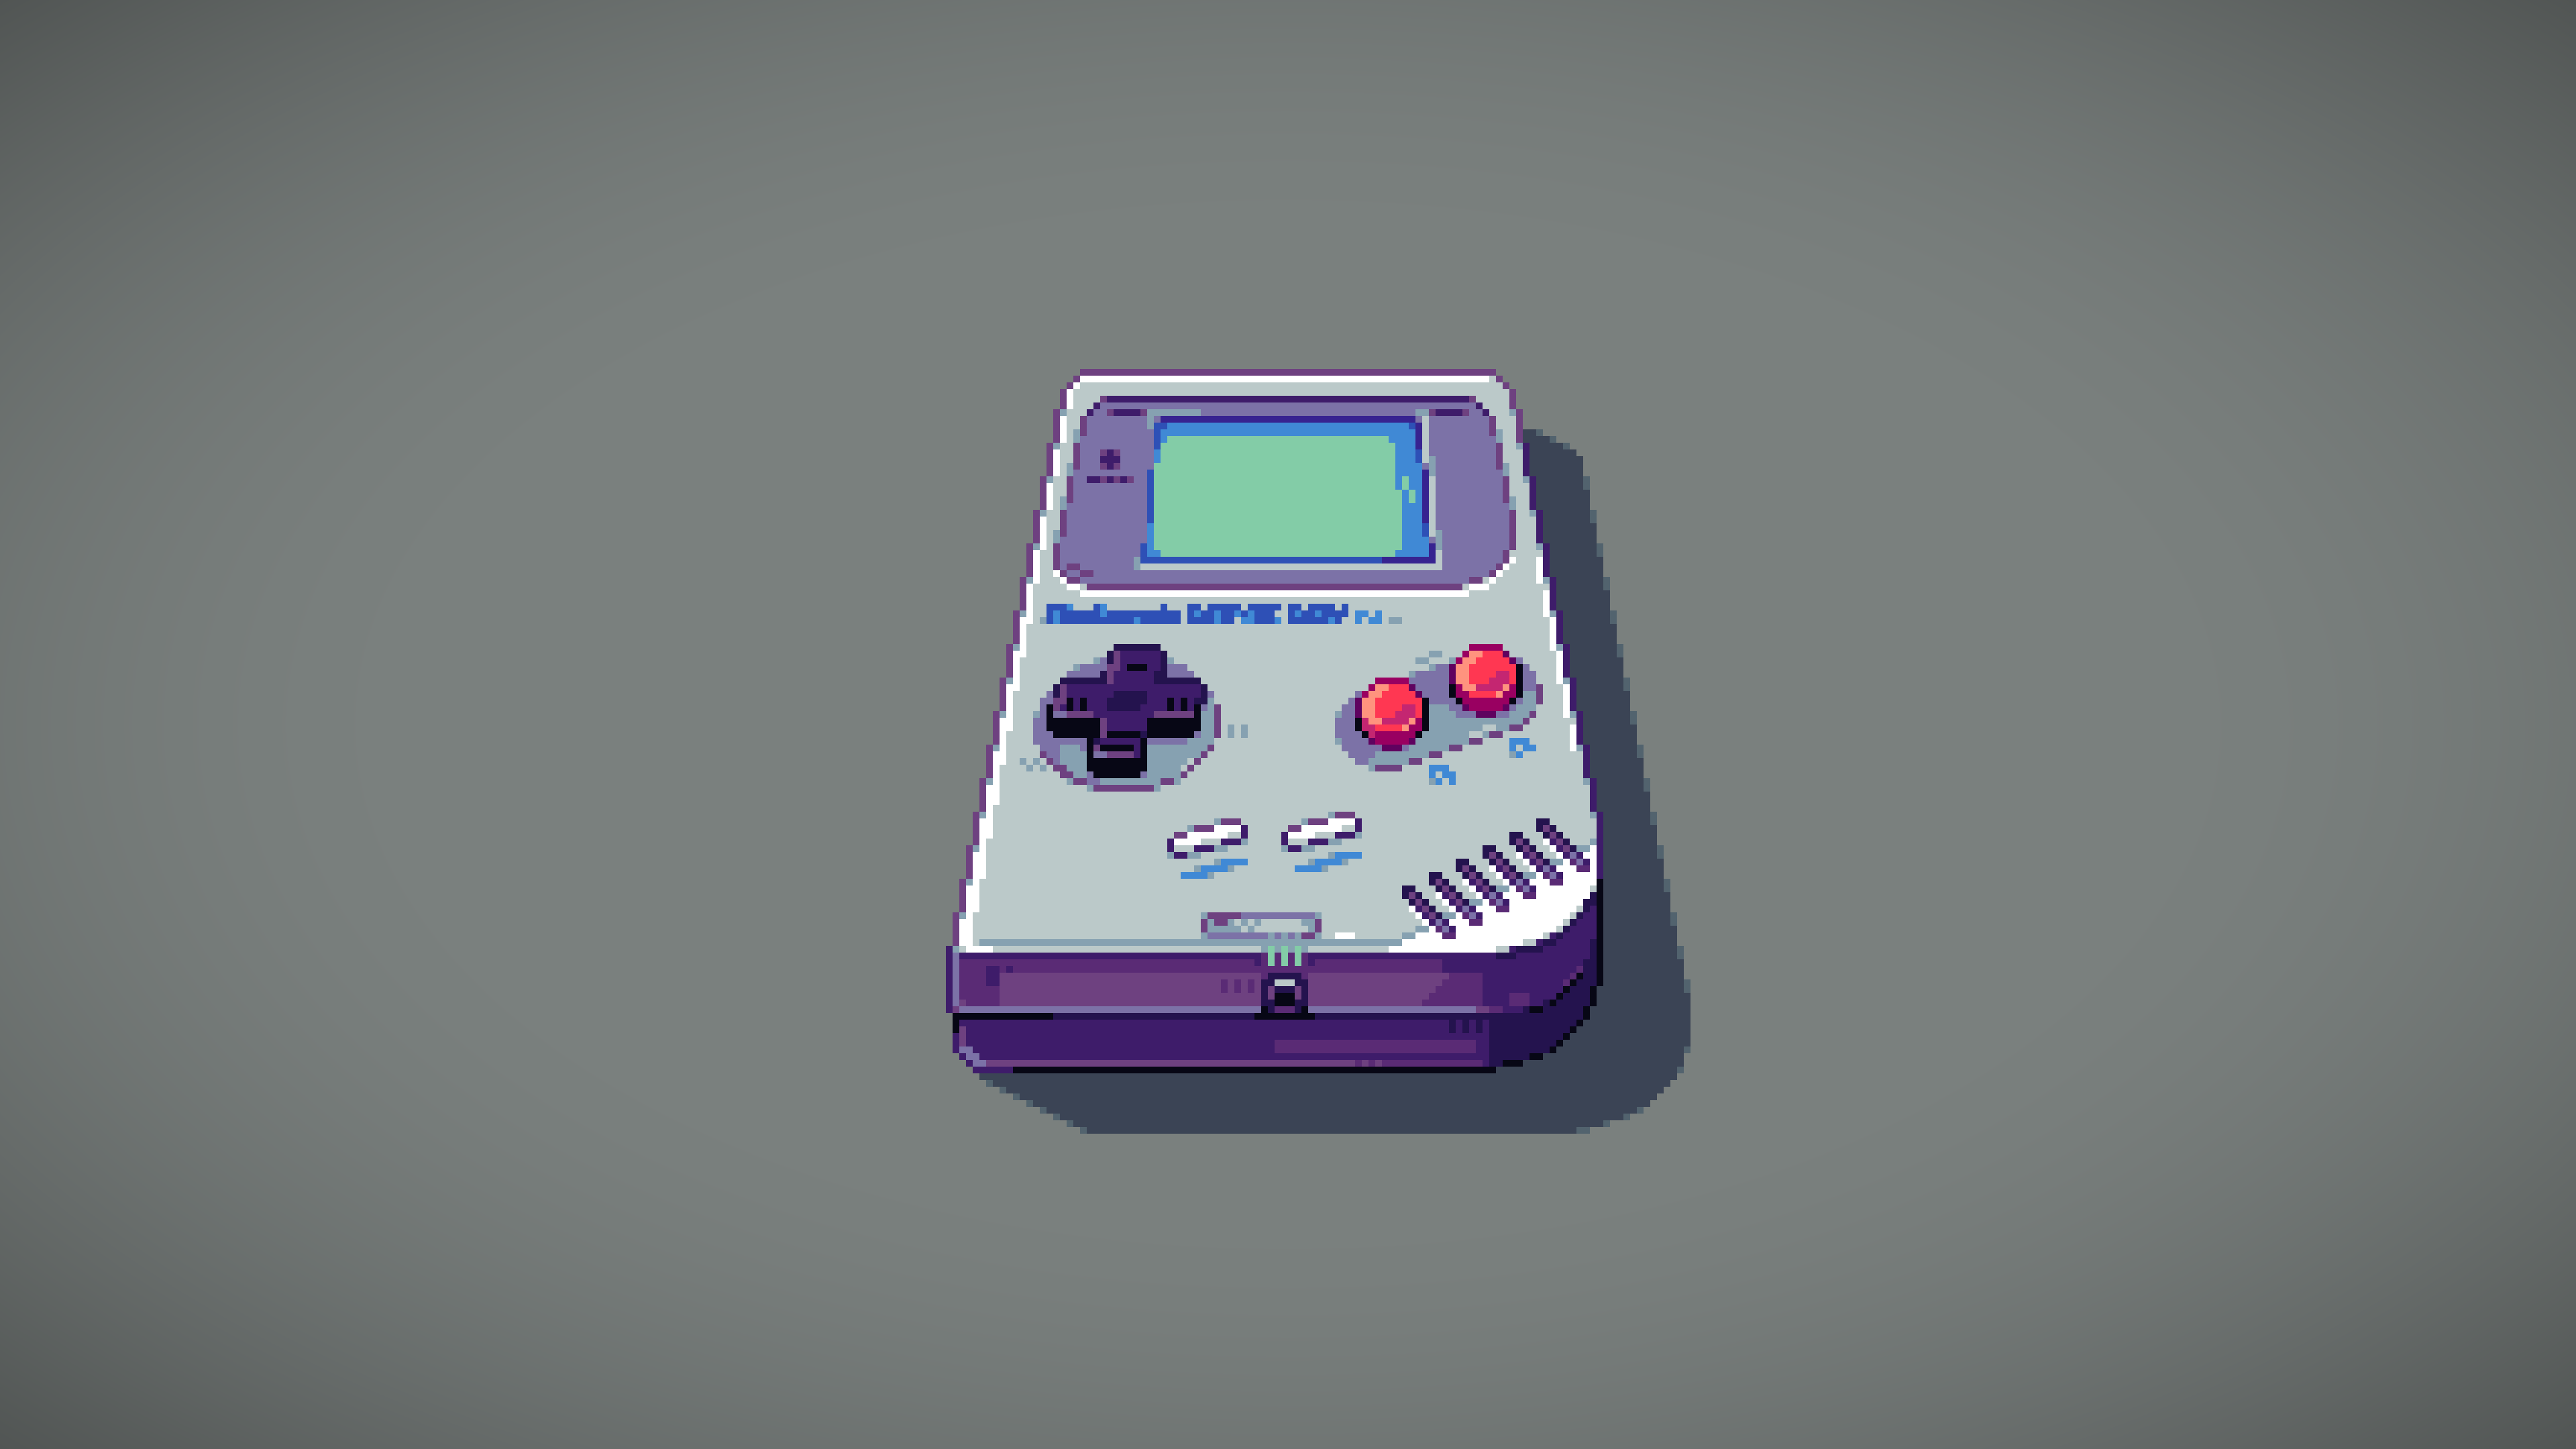 Anime 3840x2160 GameBoy Nintendo gray background buttons screens retro games pixelated pixel art simple background minimalism